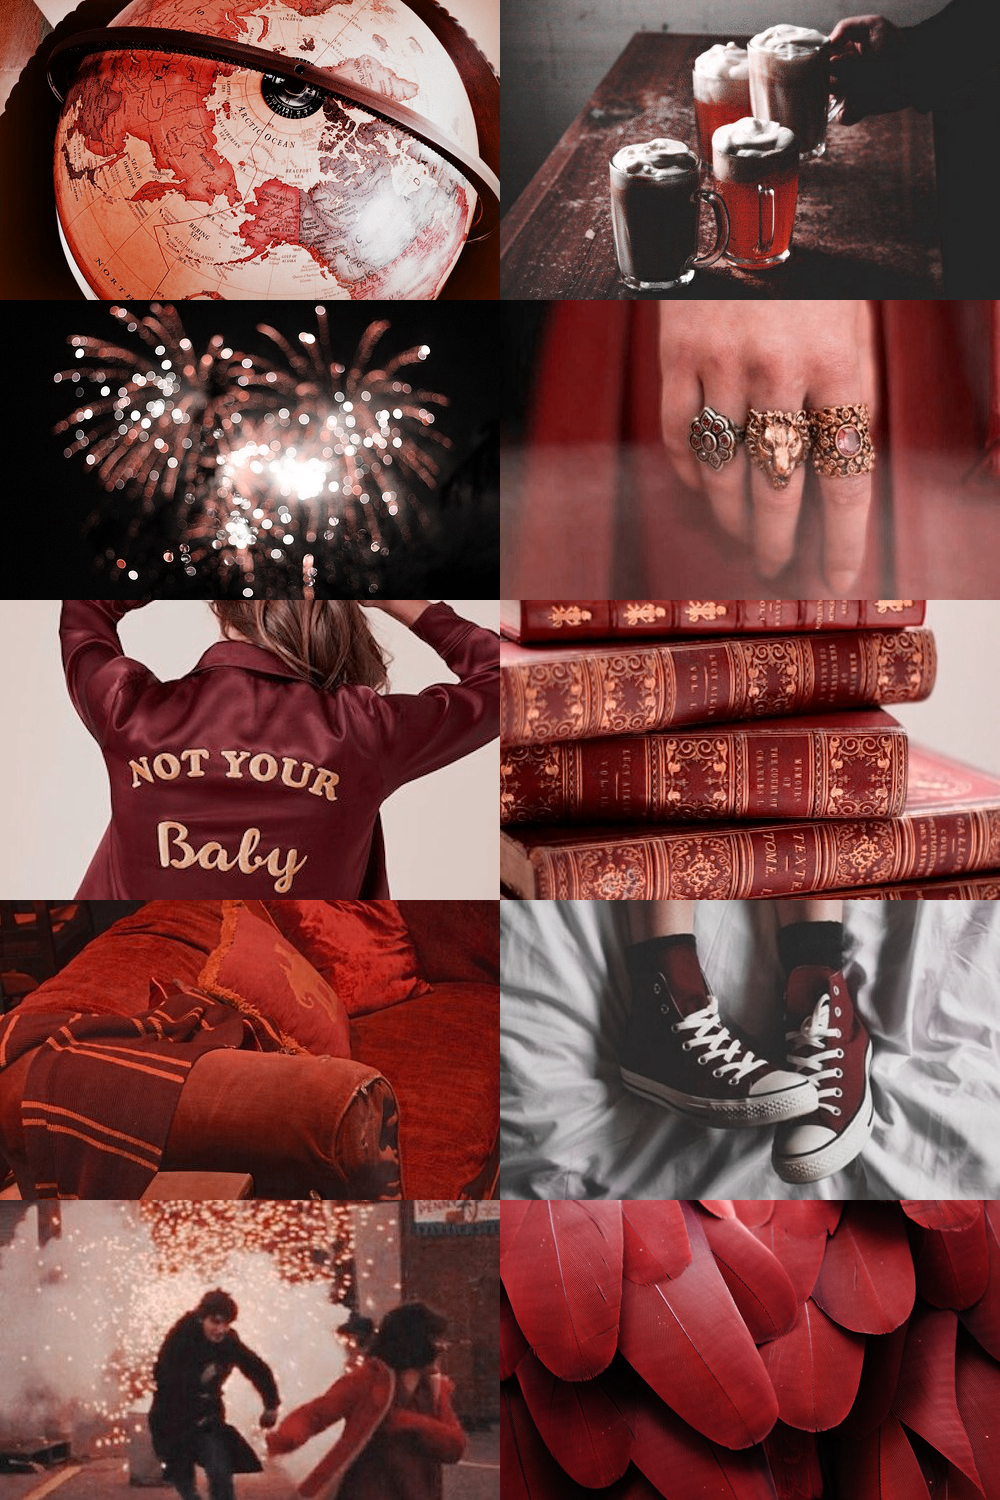 gryffindor aesthetic (more here). Gryffindor aesthetic, Harry potter aesthetic, Hogwarts